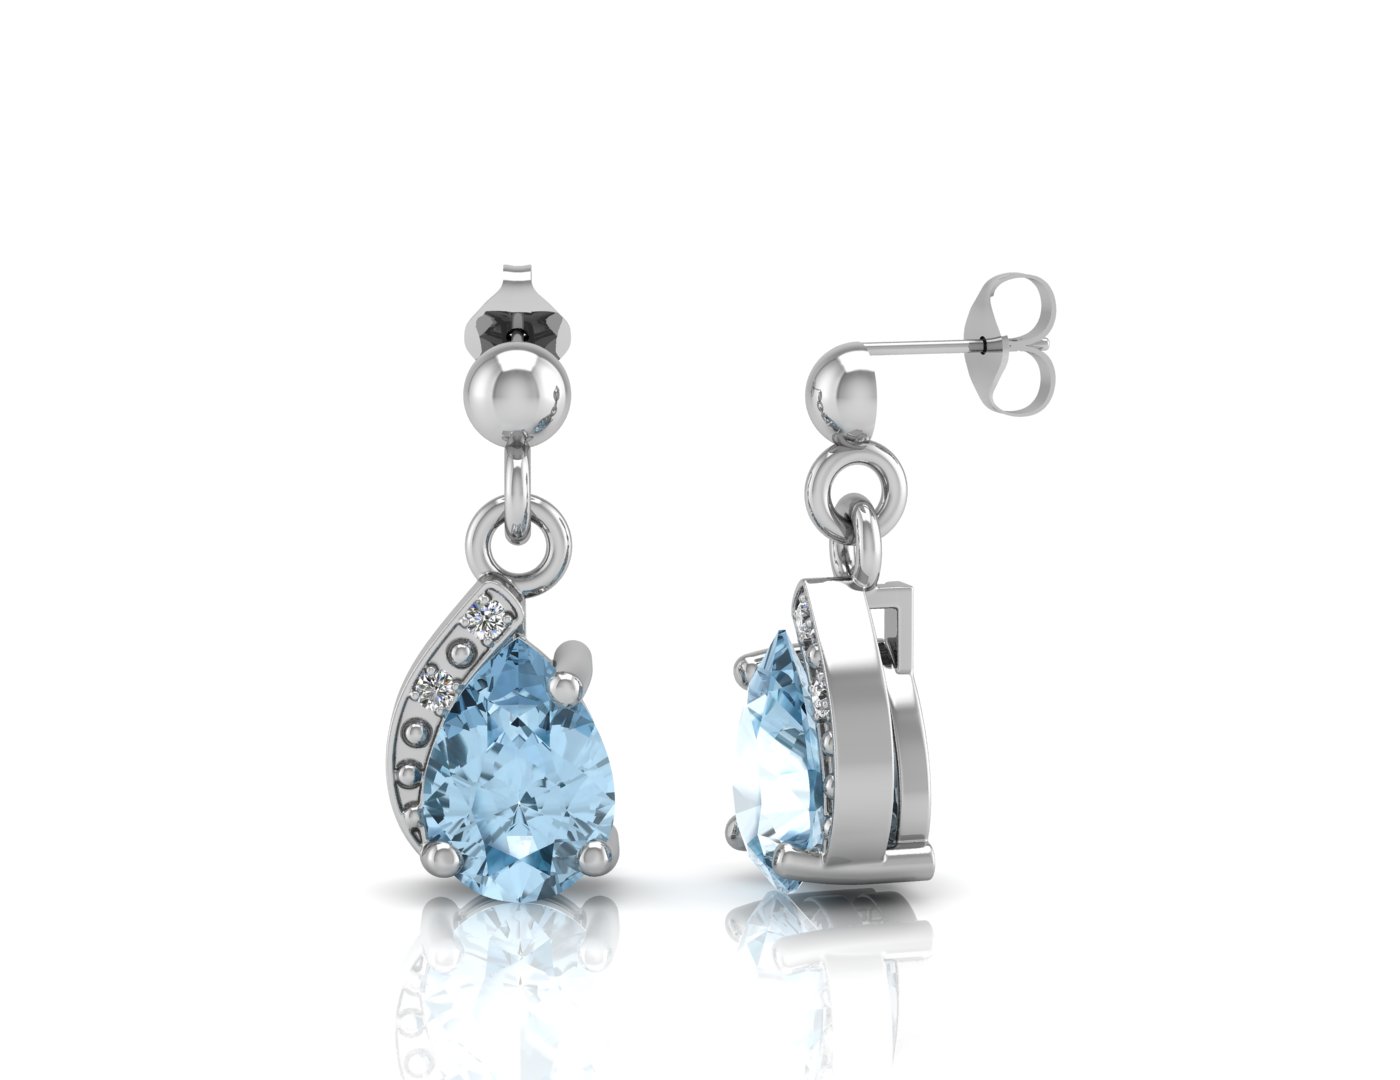 9ct White Gold Diamond And Blue Topaz Earring (BT 1.43) 0.01 Carats